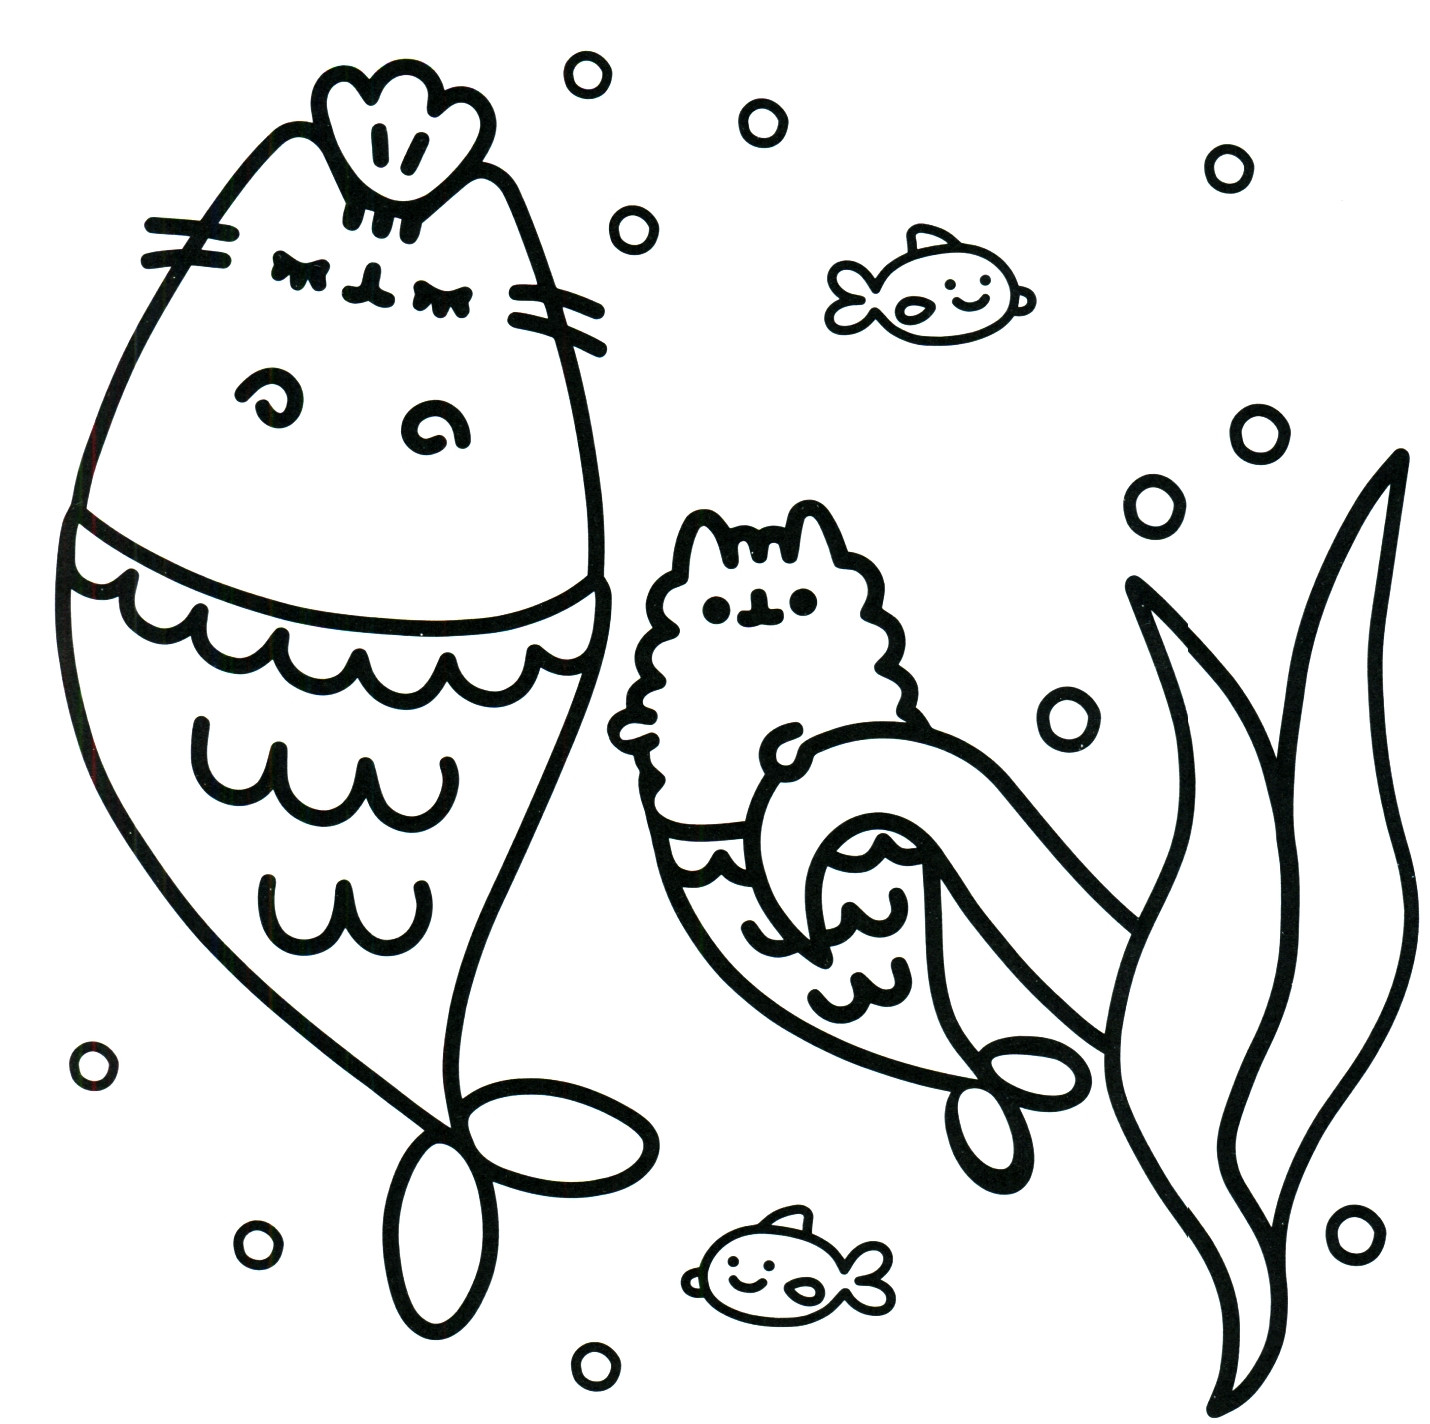 Pusheen Pusheen Coloring Pages Coloring Books Coloring Pages Images